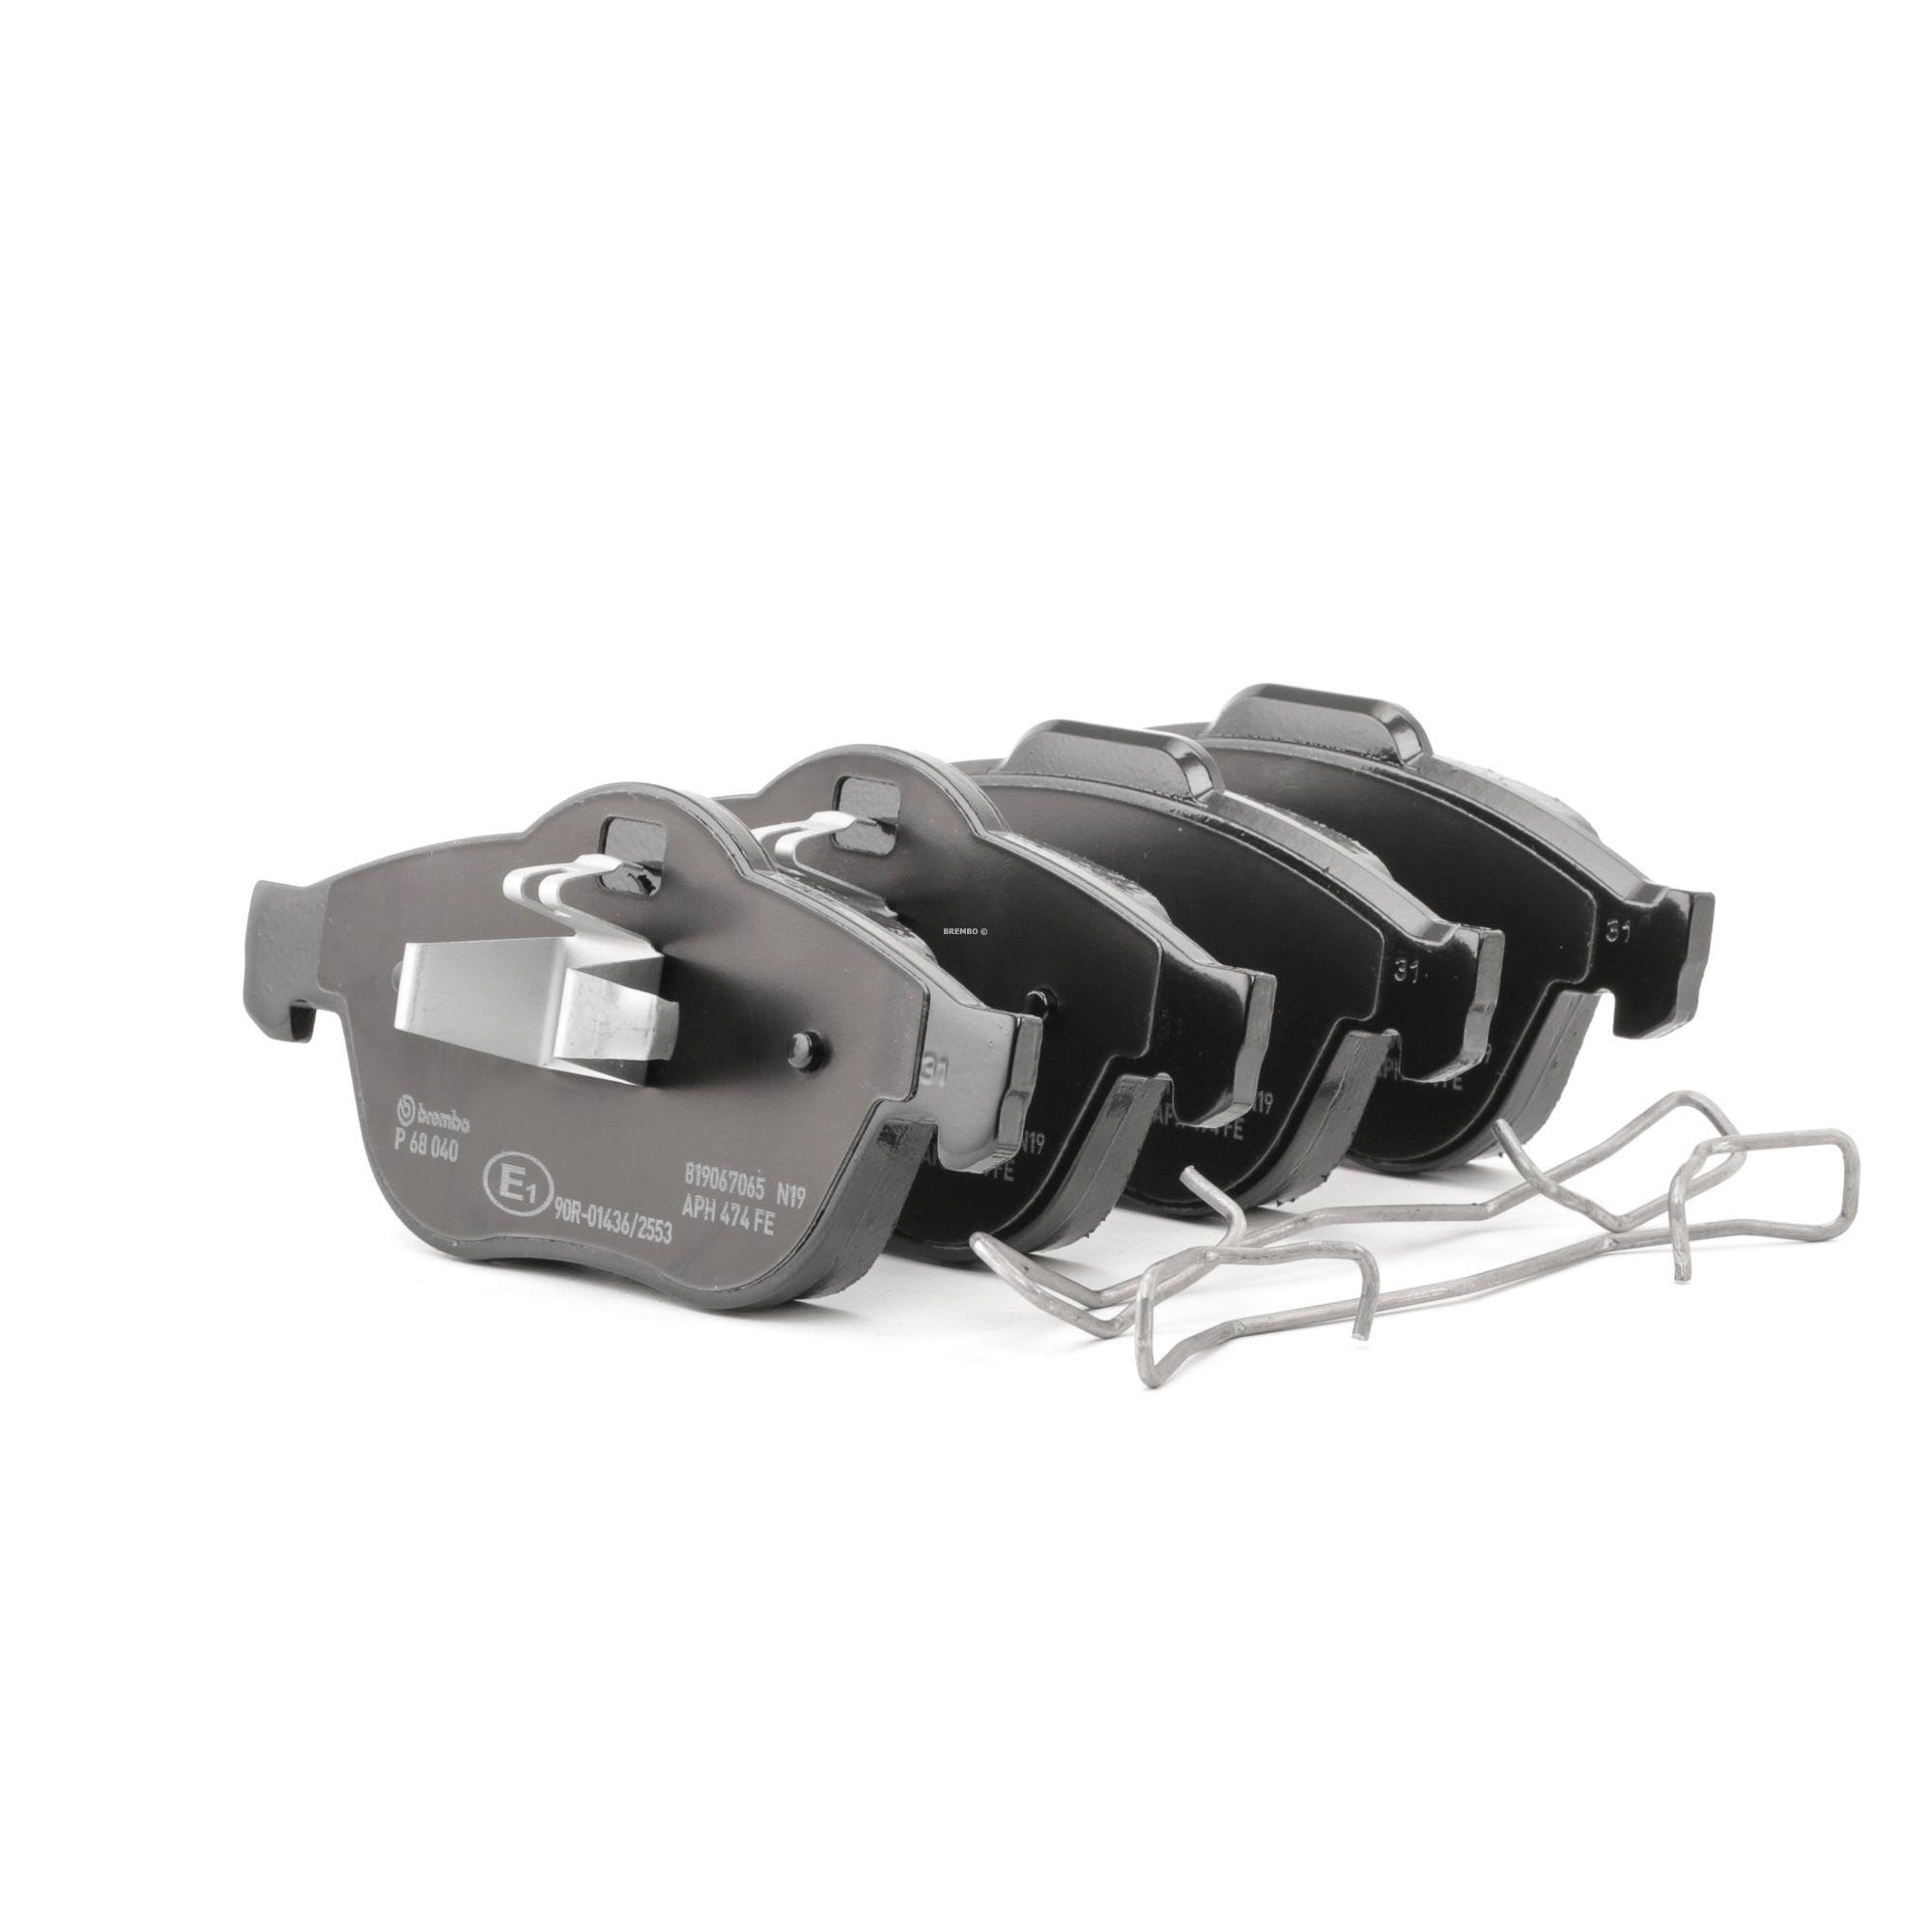 BREMBO P 68 040 Brake pad set excl. wear warning contact, with piston clip, with accessories